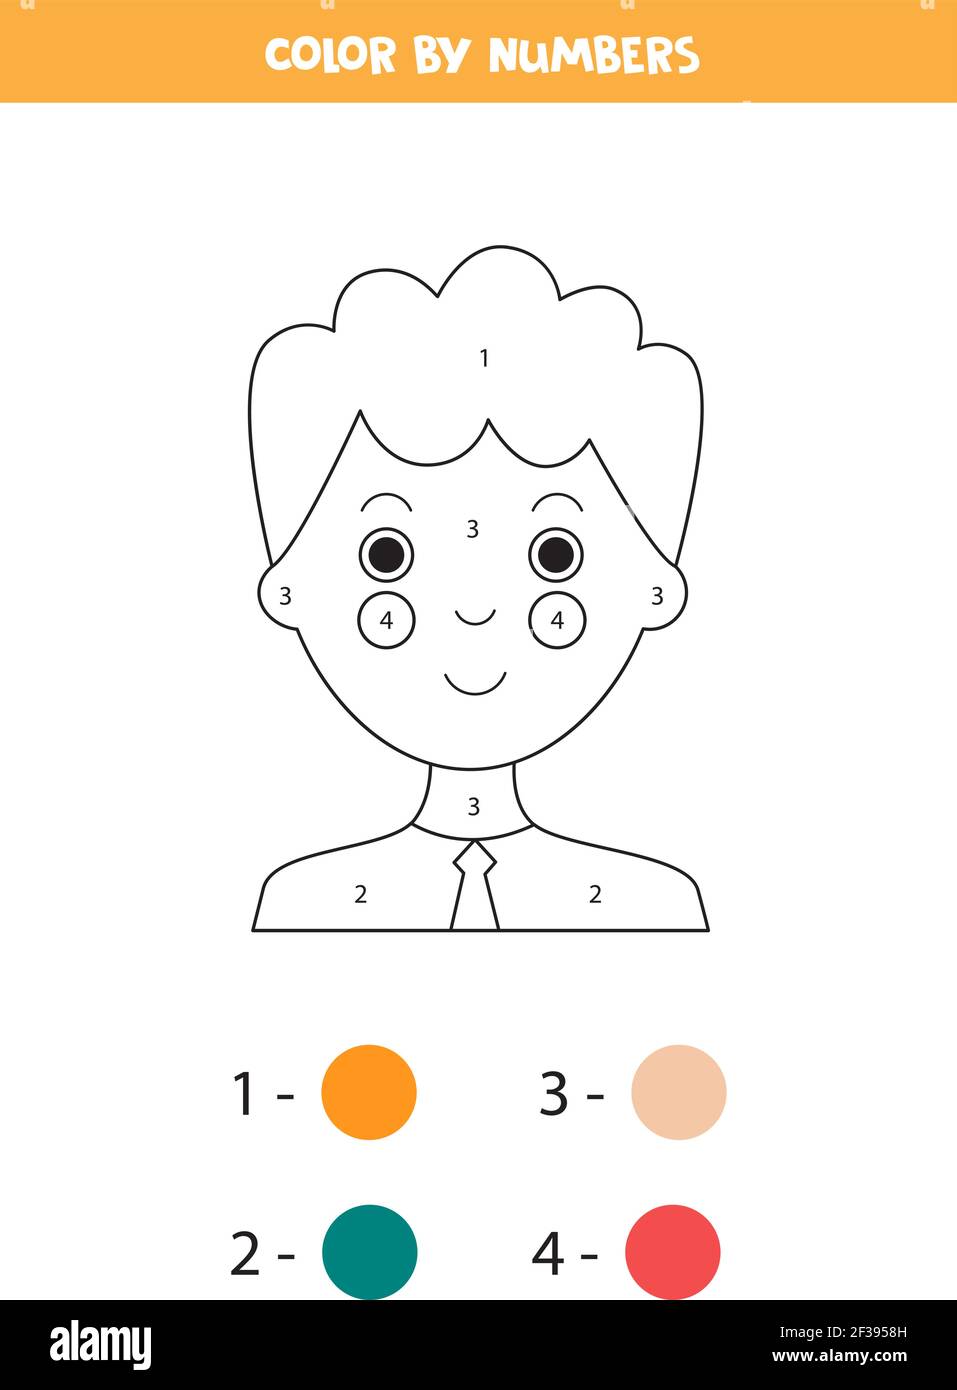 Coloring page with cute boy face. Color by numbers. Math game for kids. Stock Vector